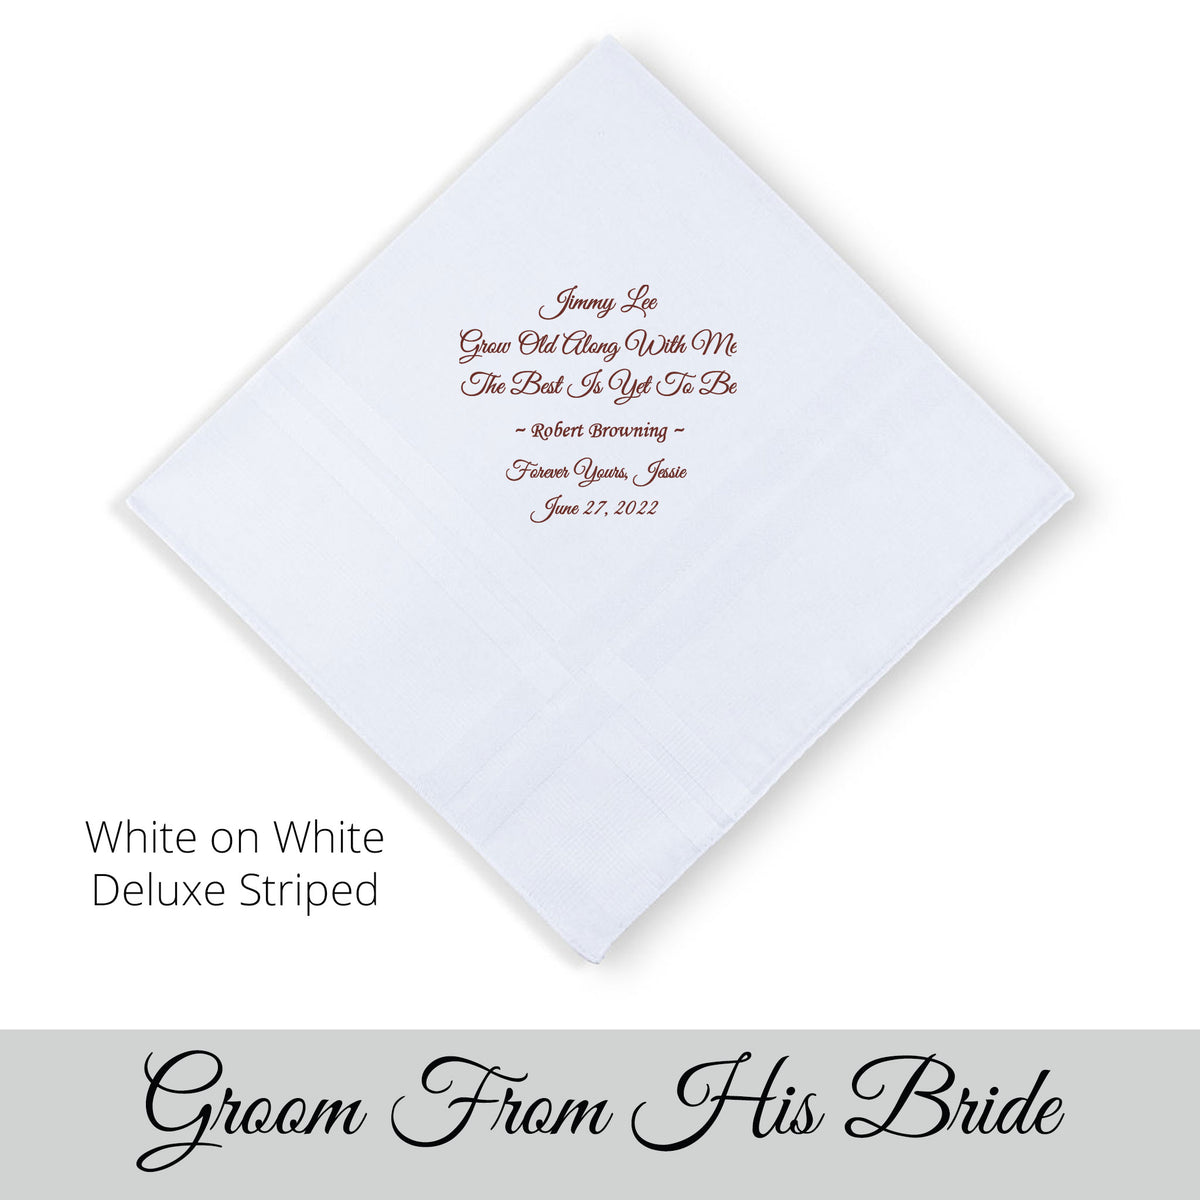 Gift for the Groom from his bride. wedding hankie with the poem Grow Old Along With Me